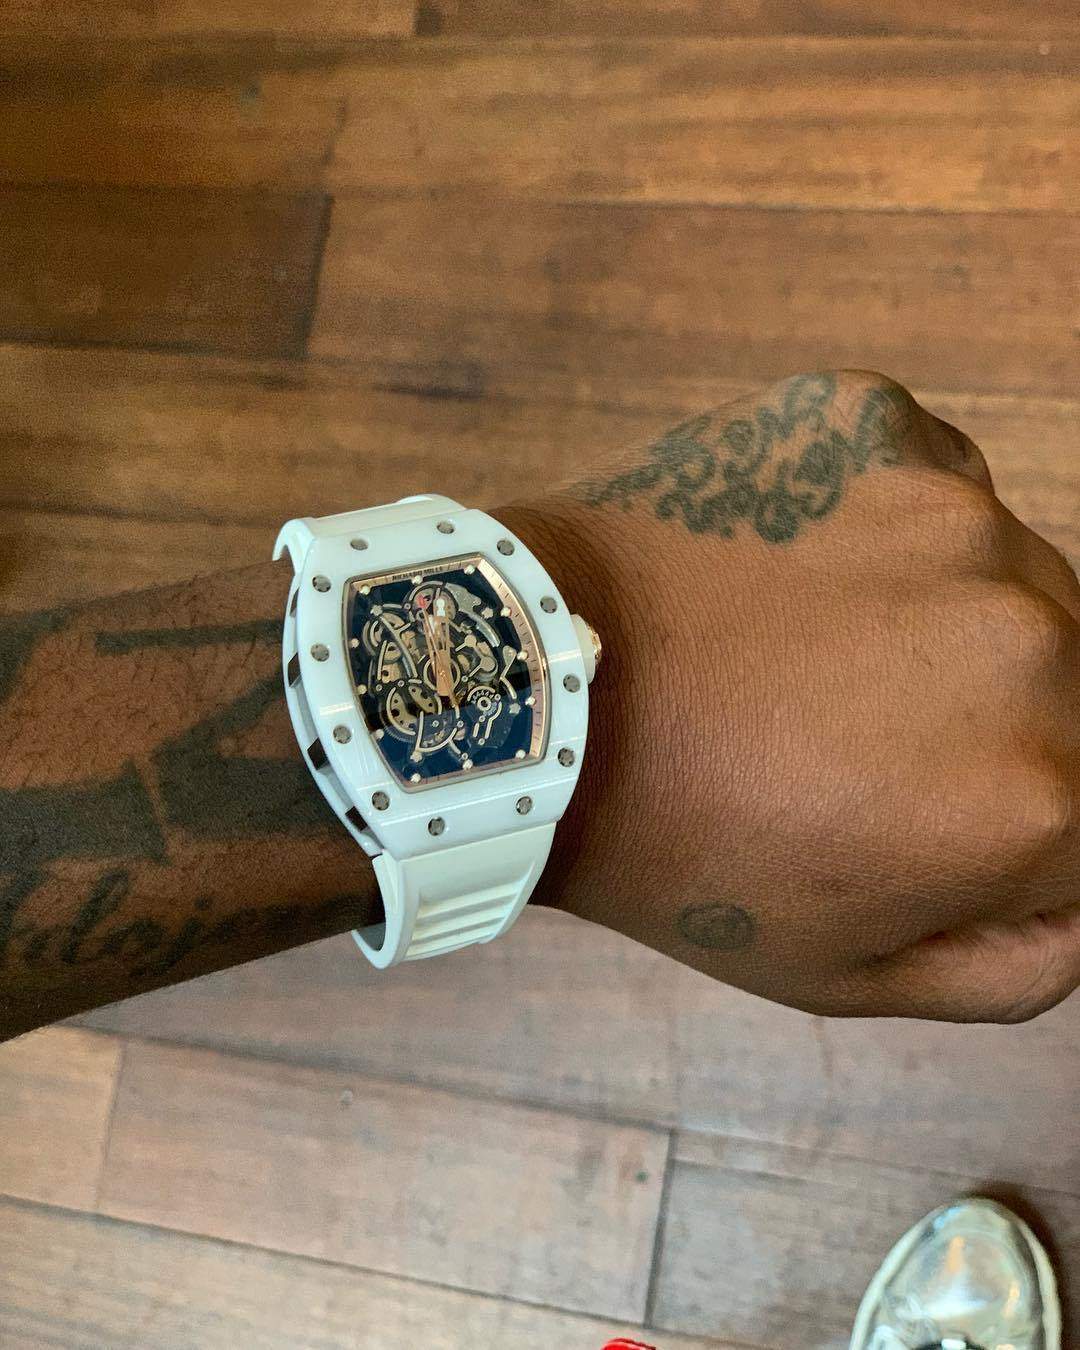 Davido shows off $300k watch as his early birthday gift